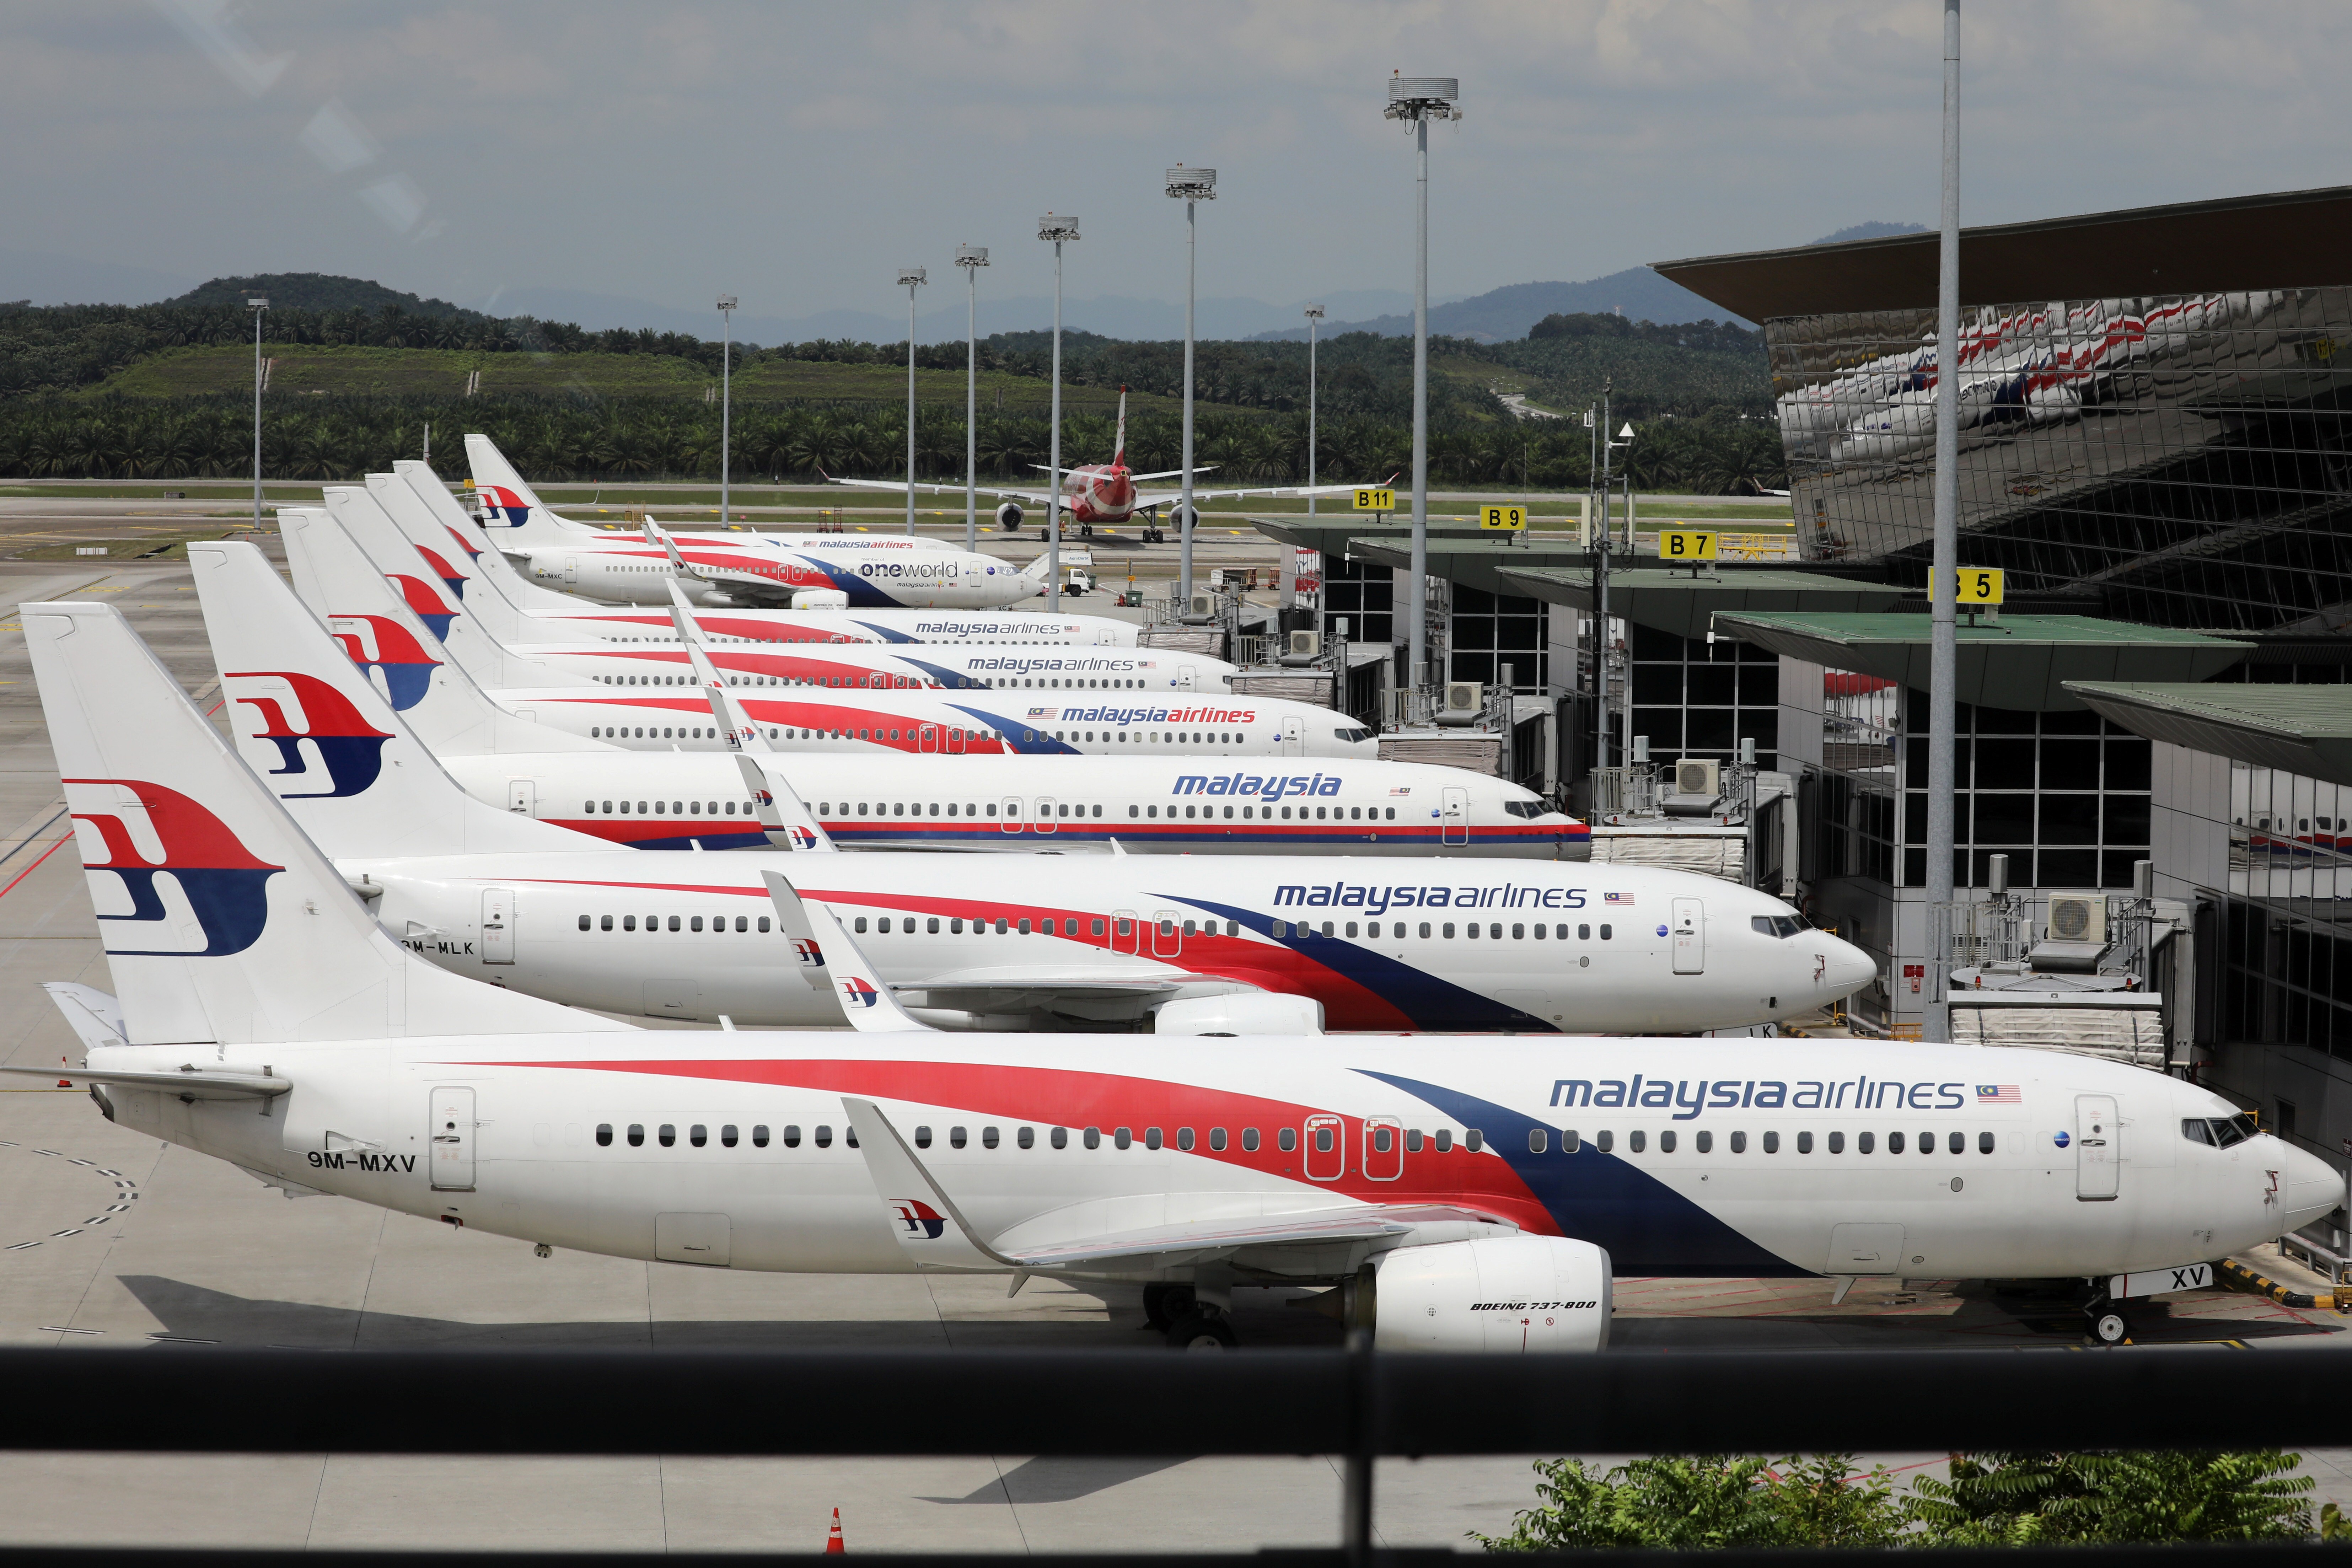 Grounded Malaysia Airlines planes are parked at the Kuala Lumpur International Airport amid the Covid-19 outbreak. Photo: Reuters